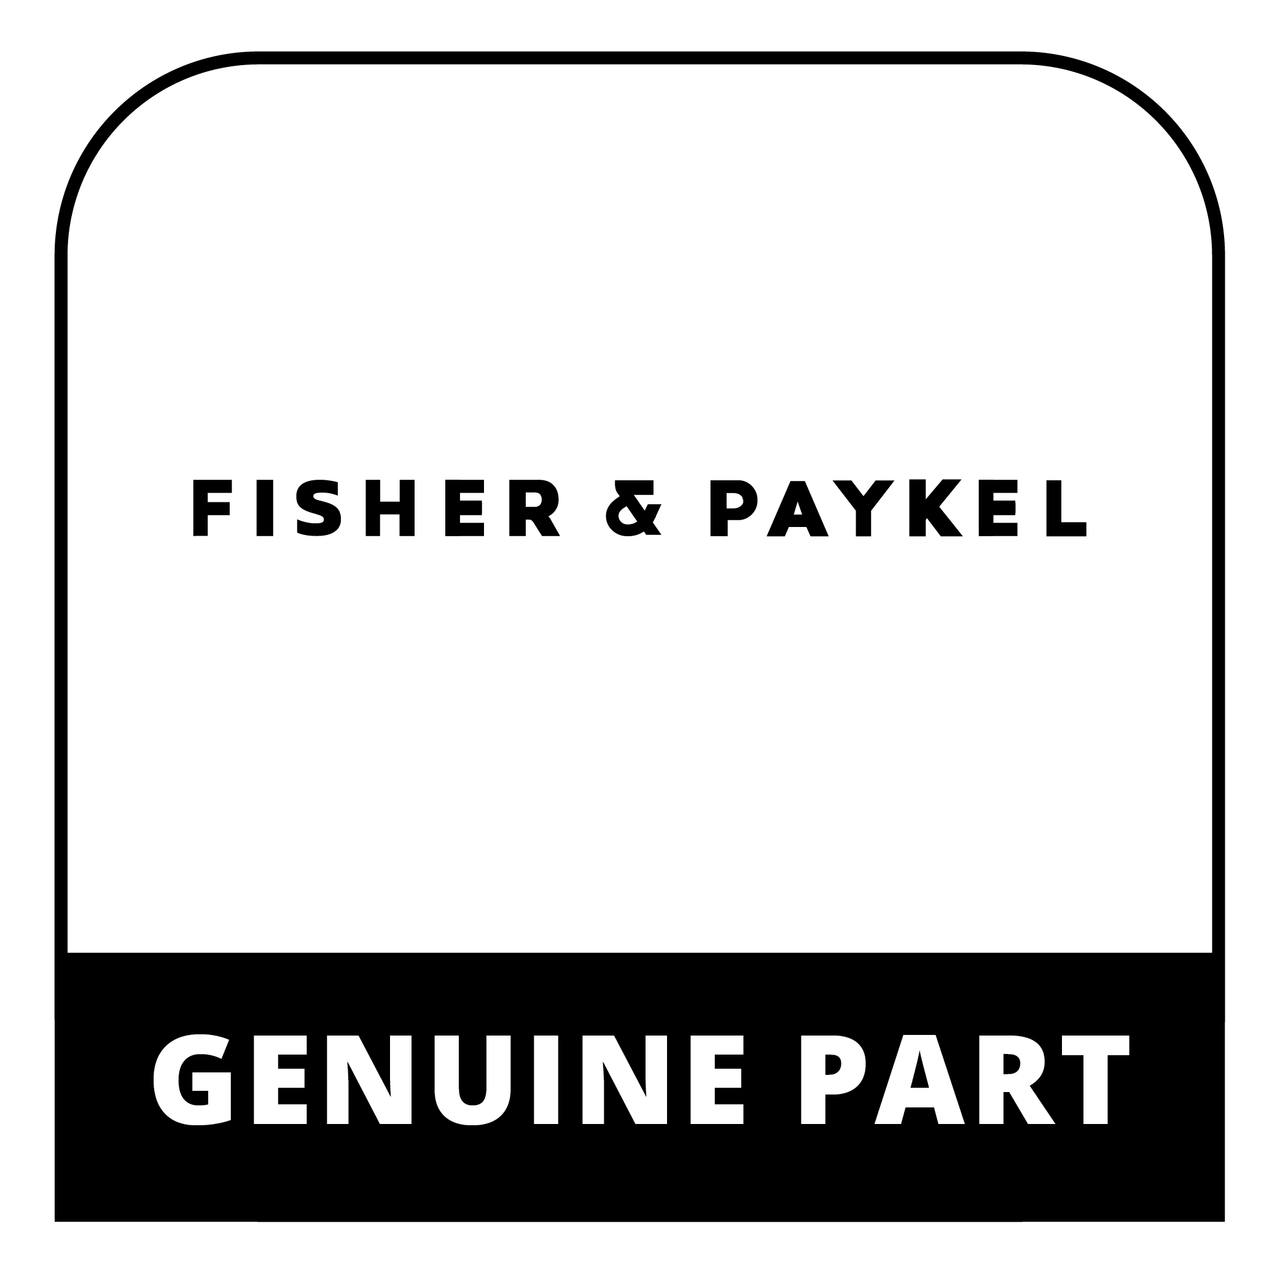 Fisher & Paykel (DCS) 592248 - Bk Ug Os24 Steam Usca Fr - Genuine Fisher & Paykel (DCS) Part